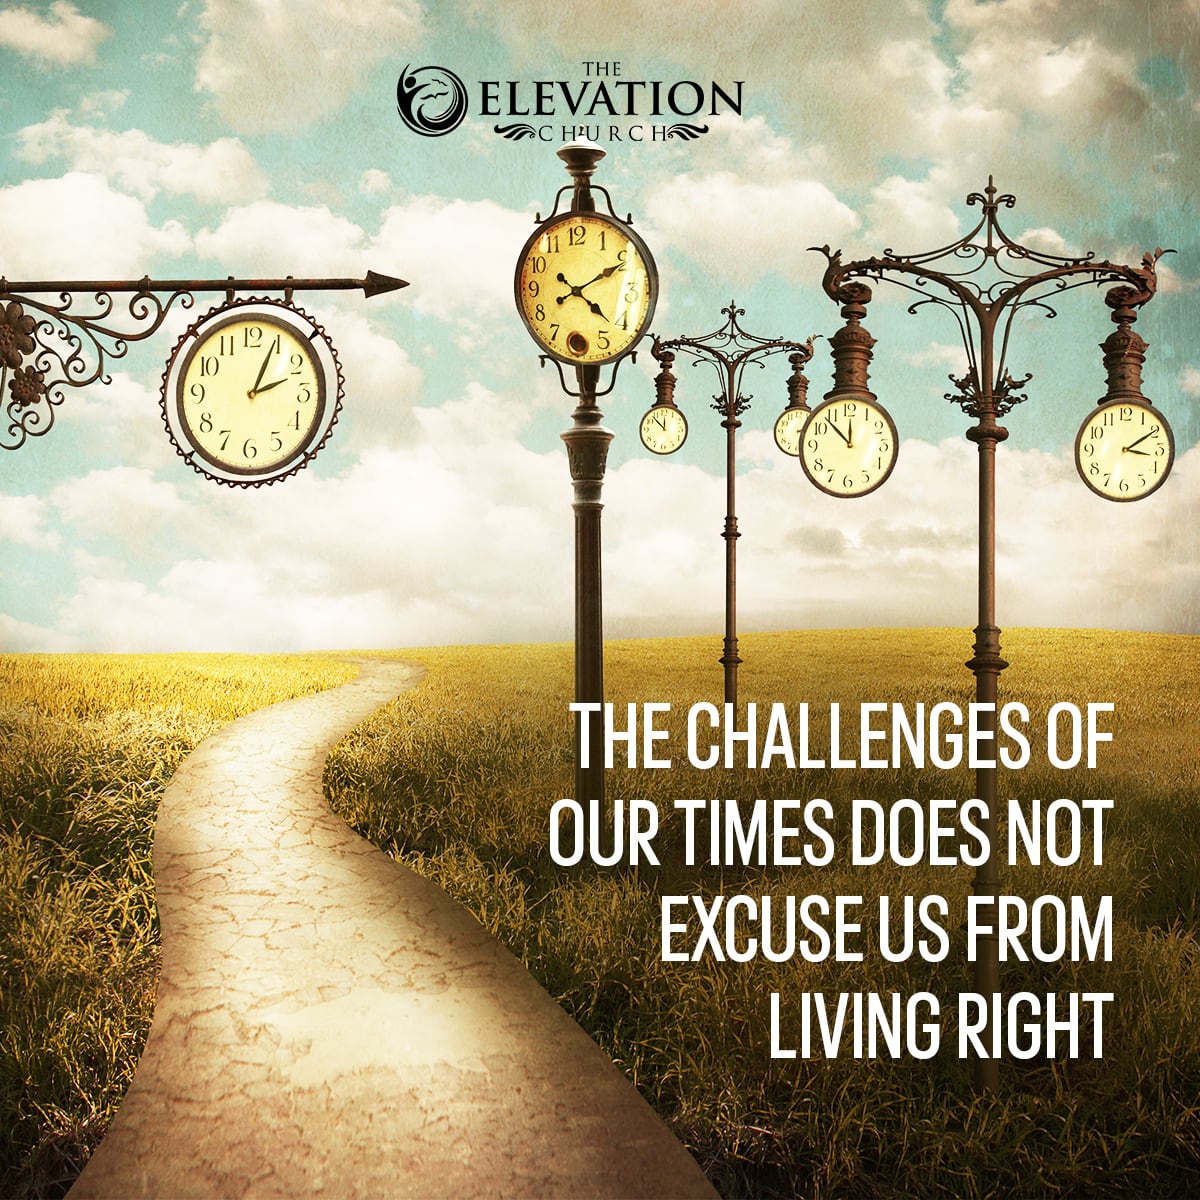 The challenges of our times does not excuse us from living right